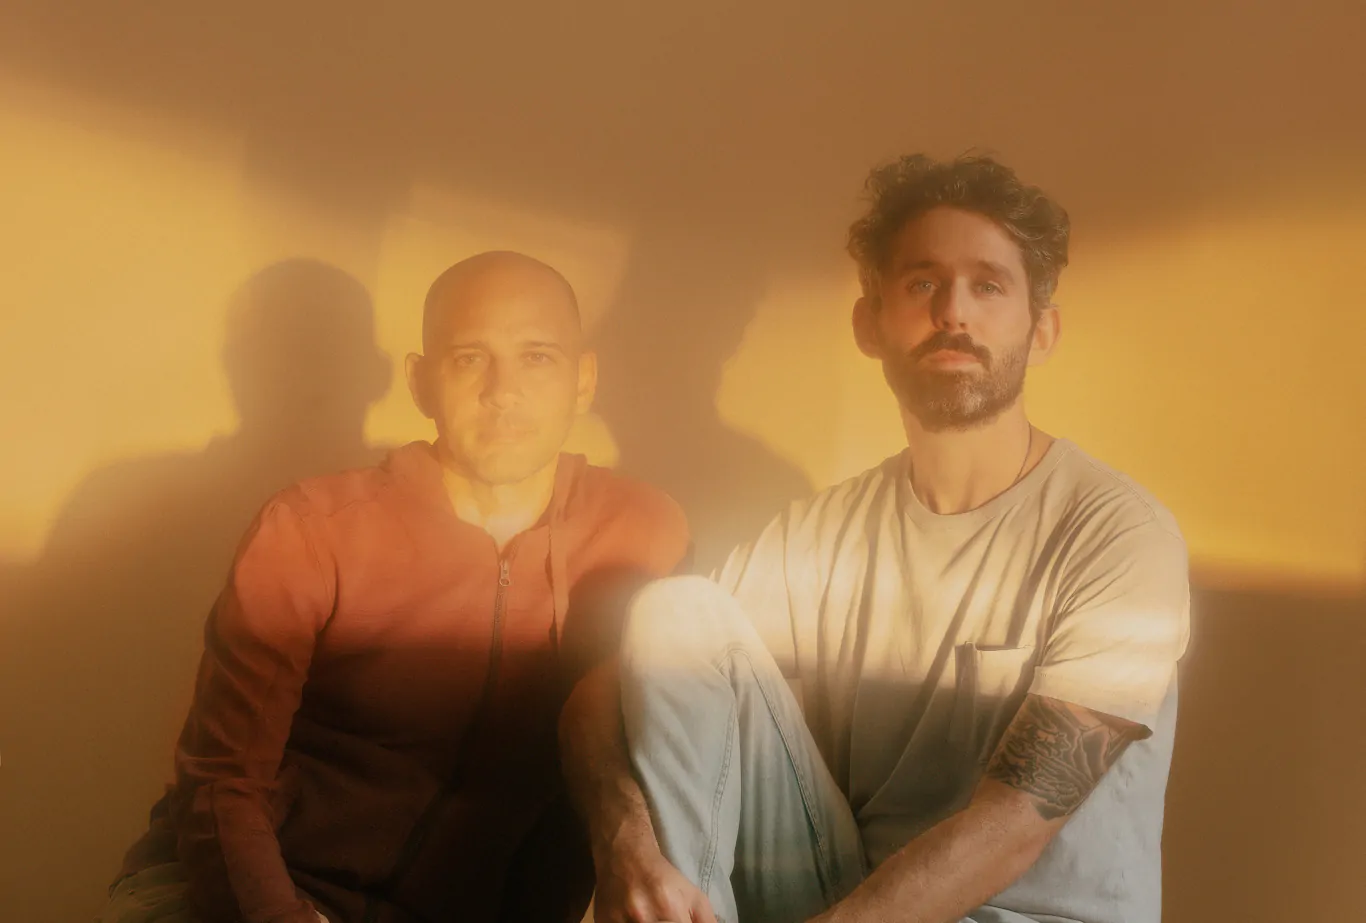 THE ANTLERS surprise release “Losing Light” EP, featuring four reimagined songs from “Green To Gold”